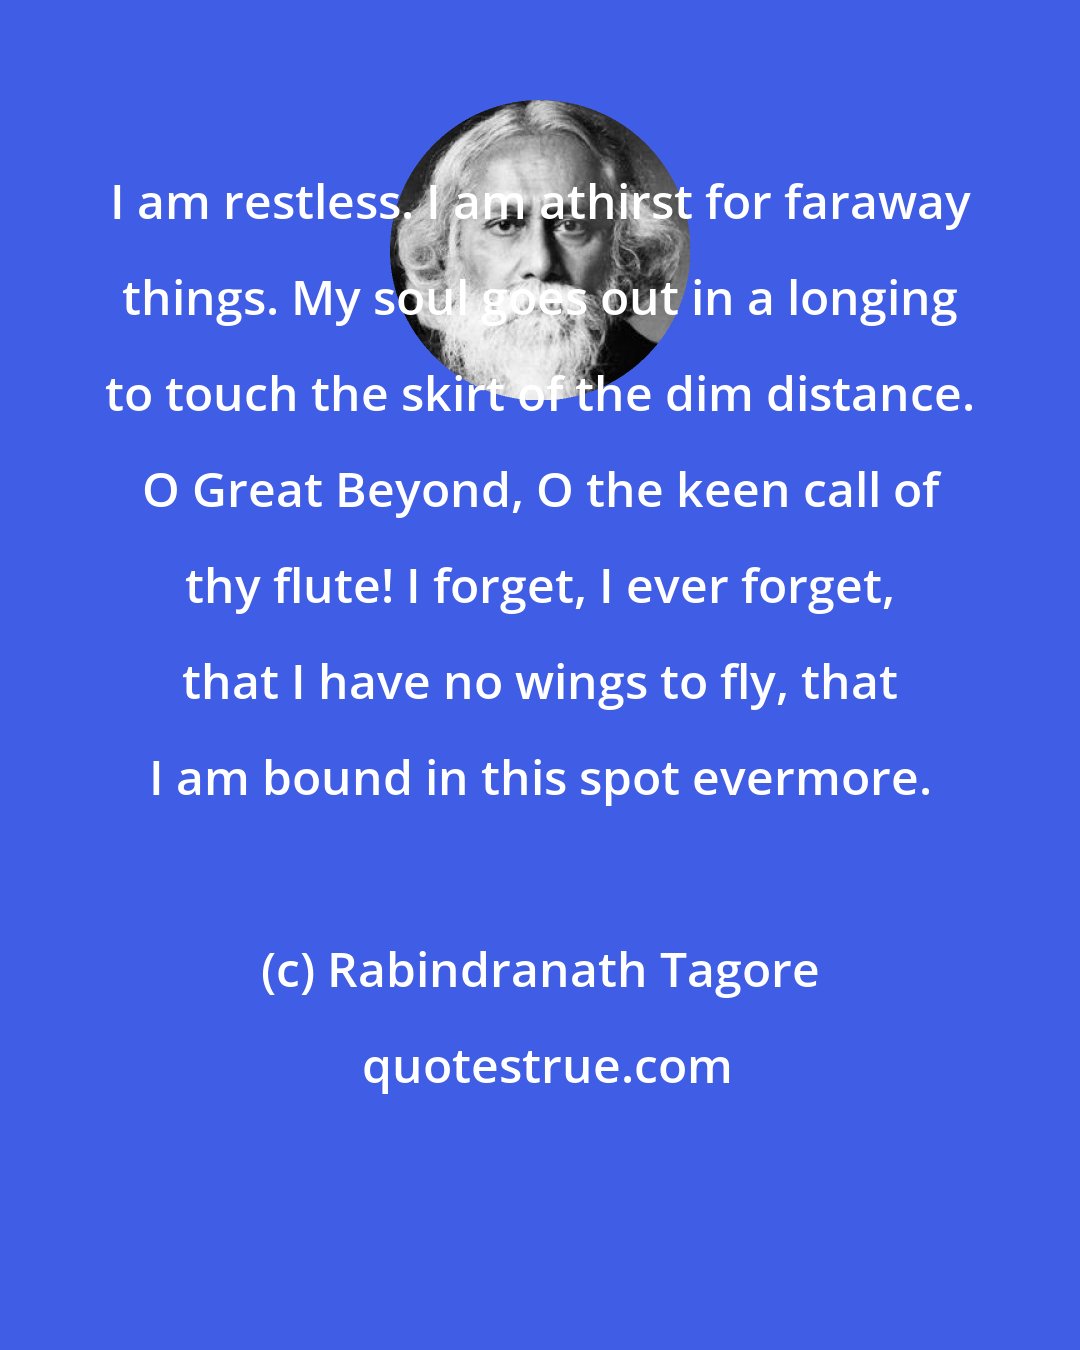 Rabindranath Tagore: I am restless. I am athirst for faraway things. My soul goes out in a longing to touch the skirt of the dim distance. O Great Beyond, O the keen call of thy flute! I forget, I ever forget, that I have no wings to fly, that I am bound in this spot evermore.